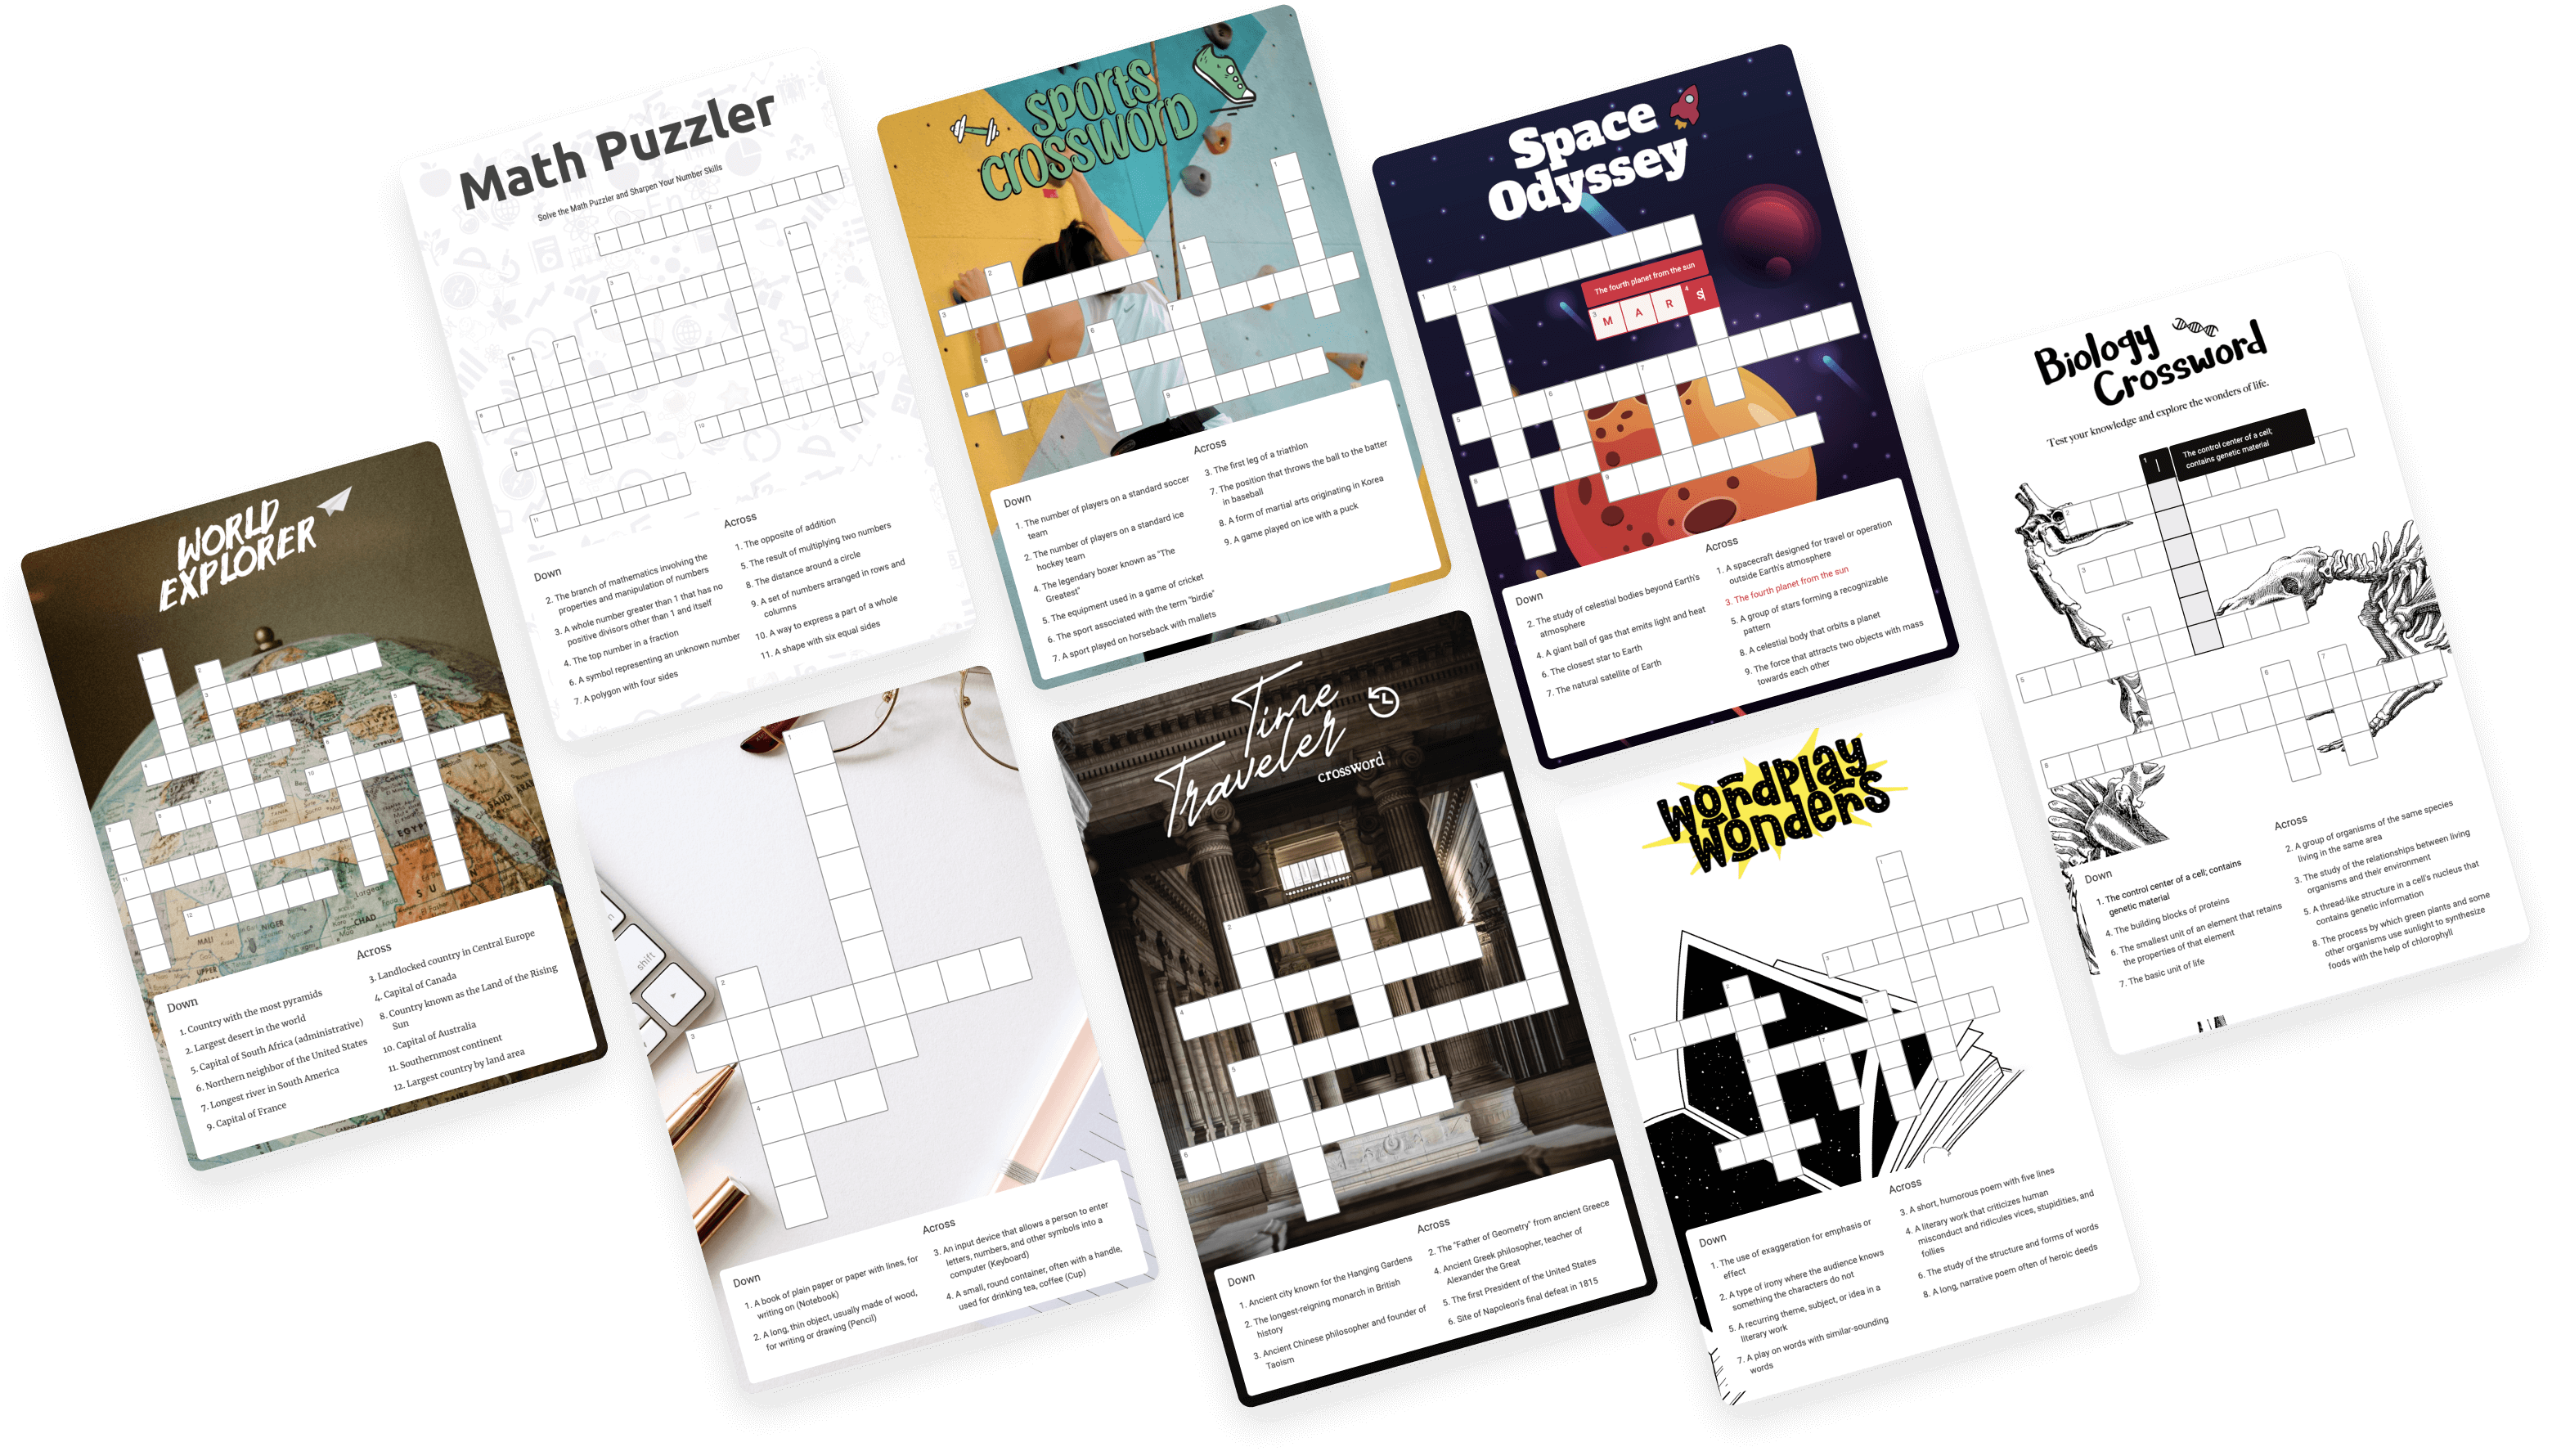 Posters with Interacty projects based on mechanics "Crossword Puzzle"